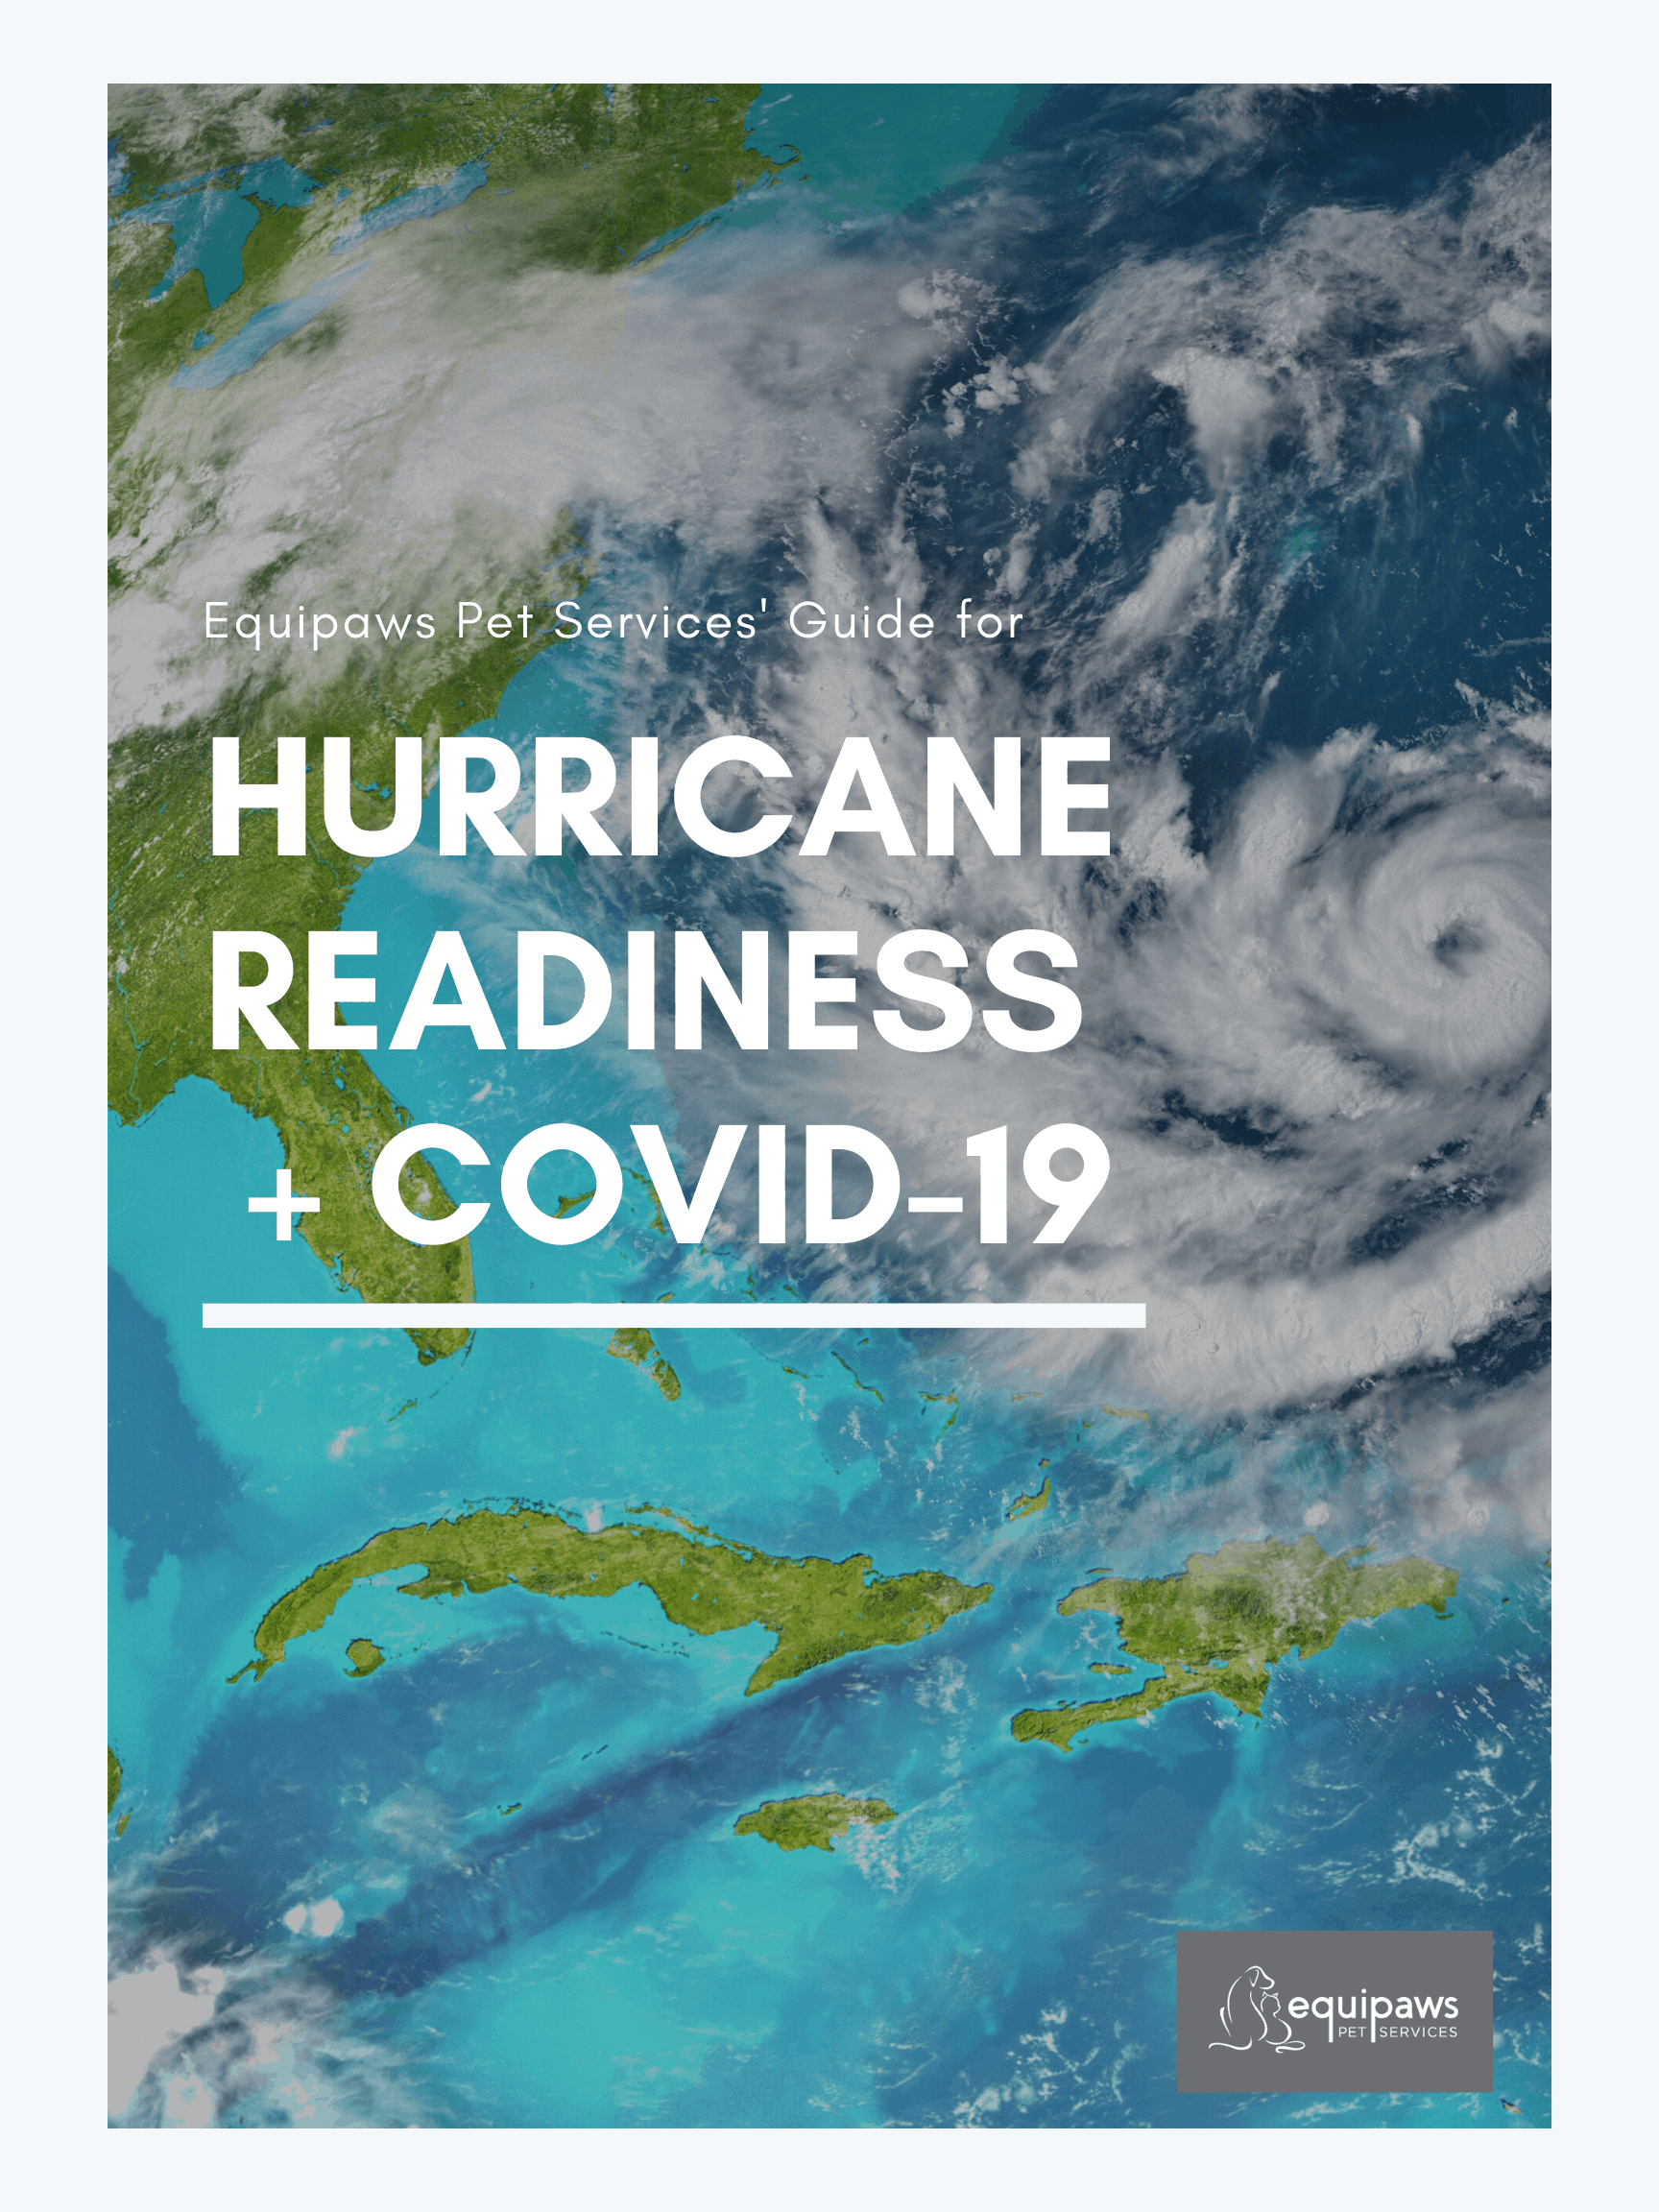 Hurricane readiness + Covid-19 for pet owners